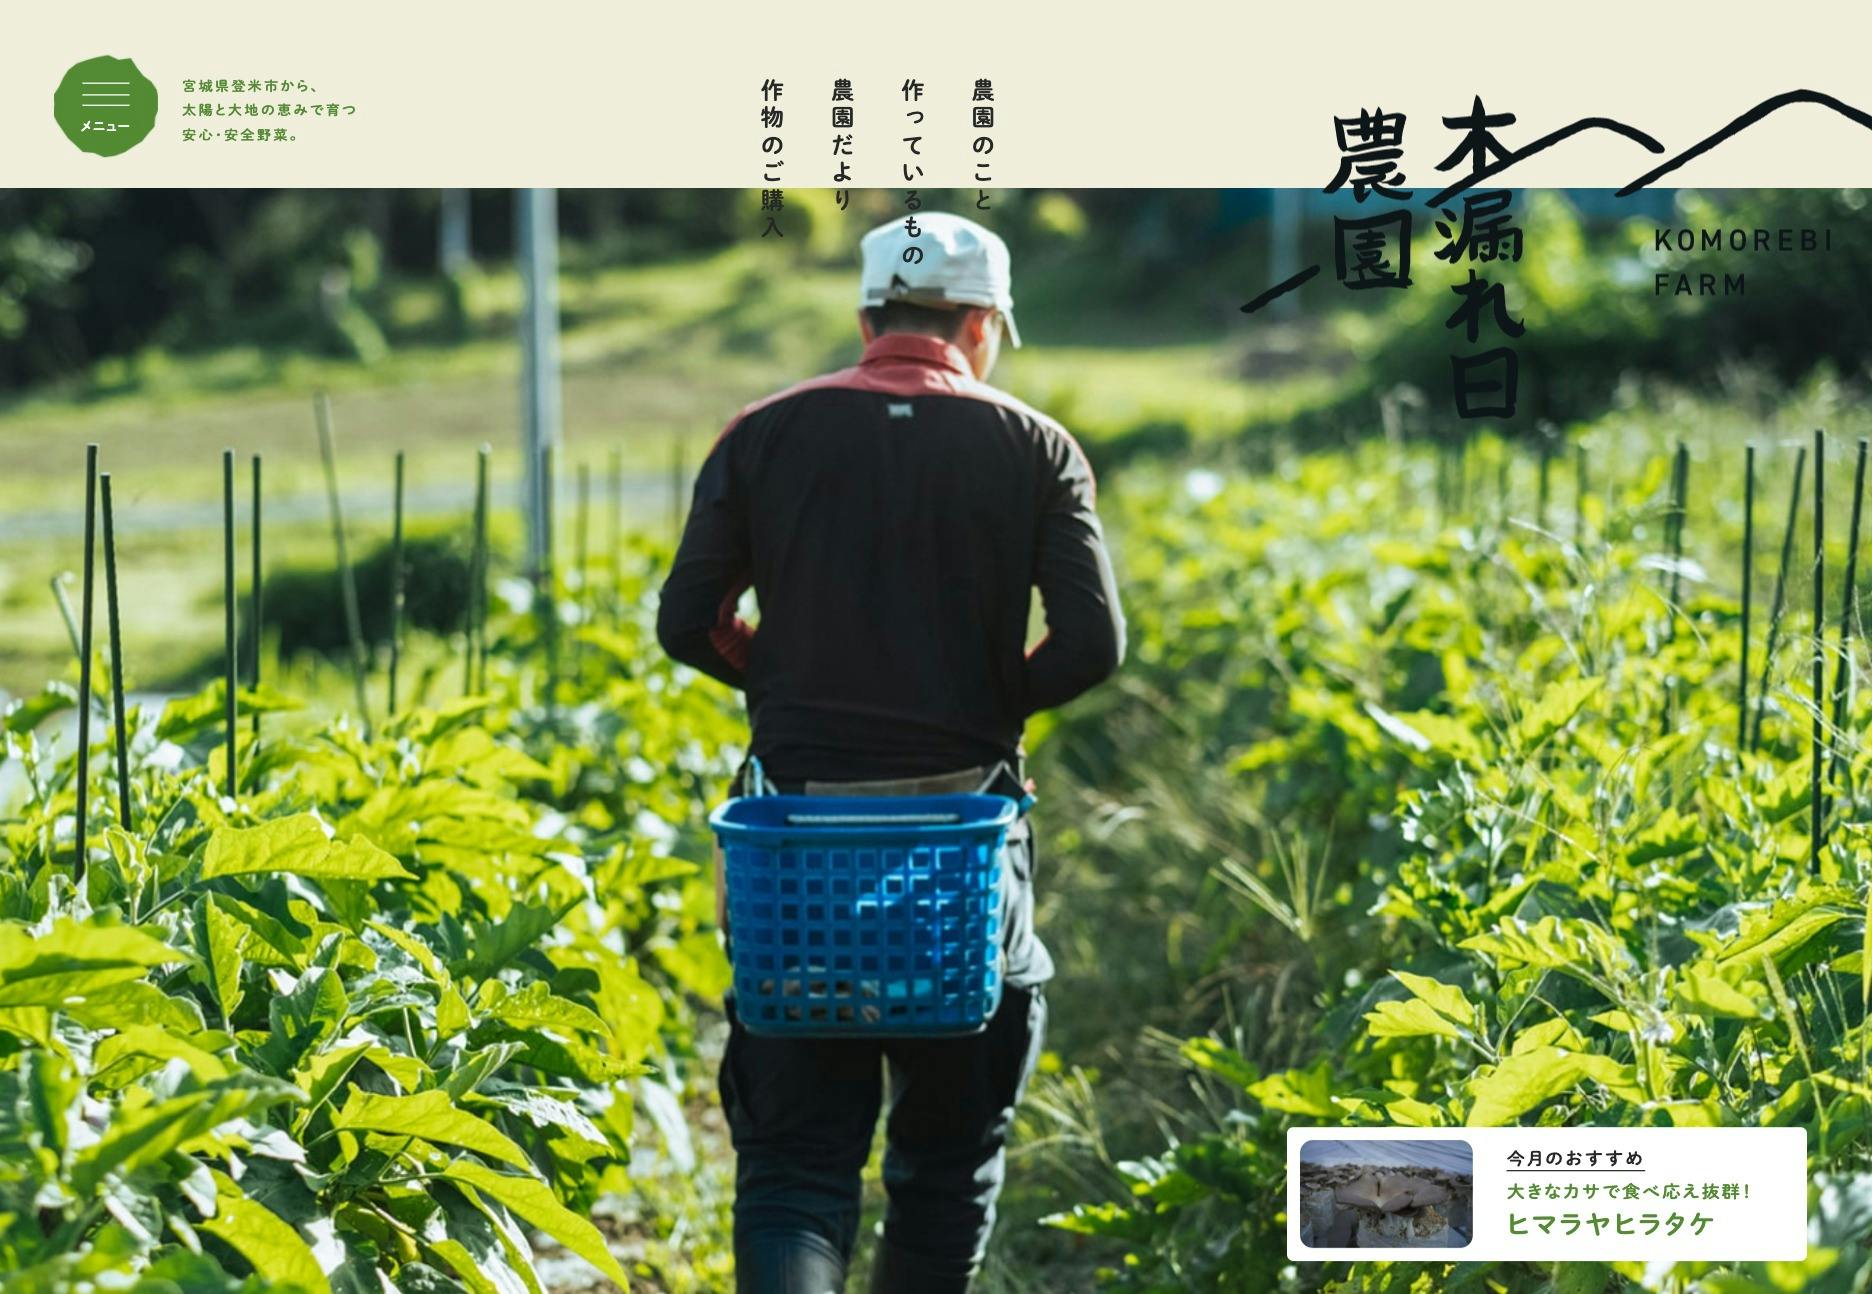 Cover Image for 宮城県登米市の新鮮野菜｜合同会社 木漏れ日農園